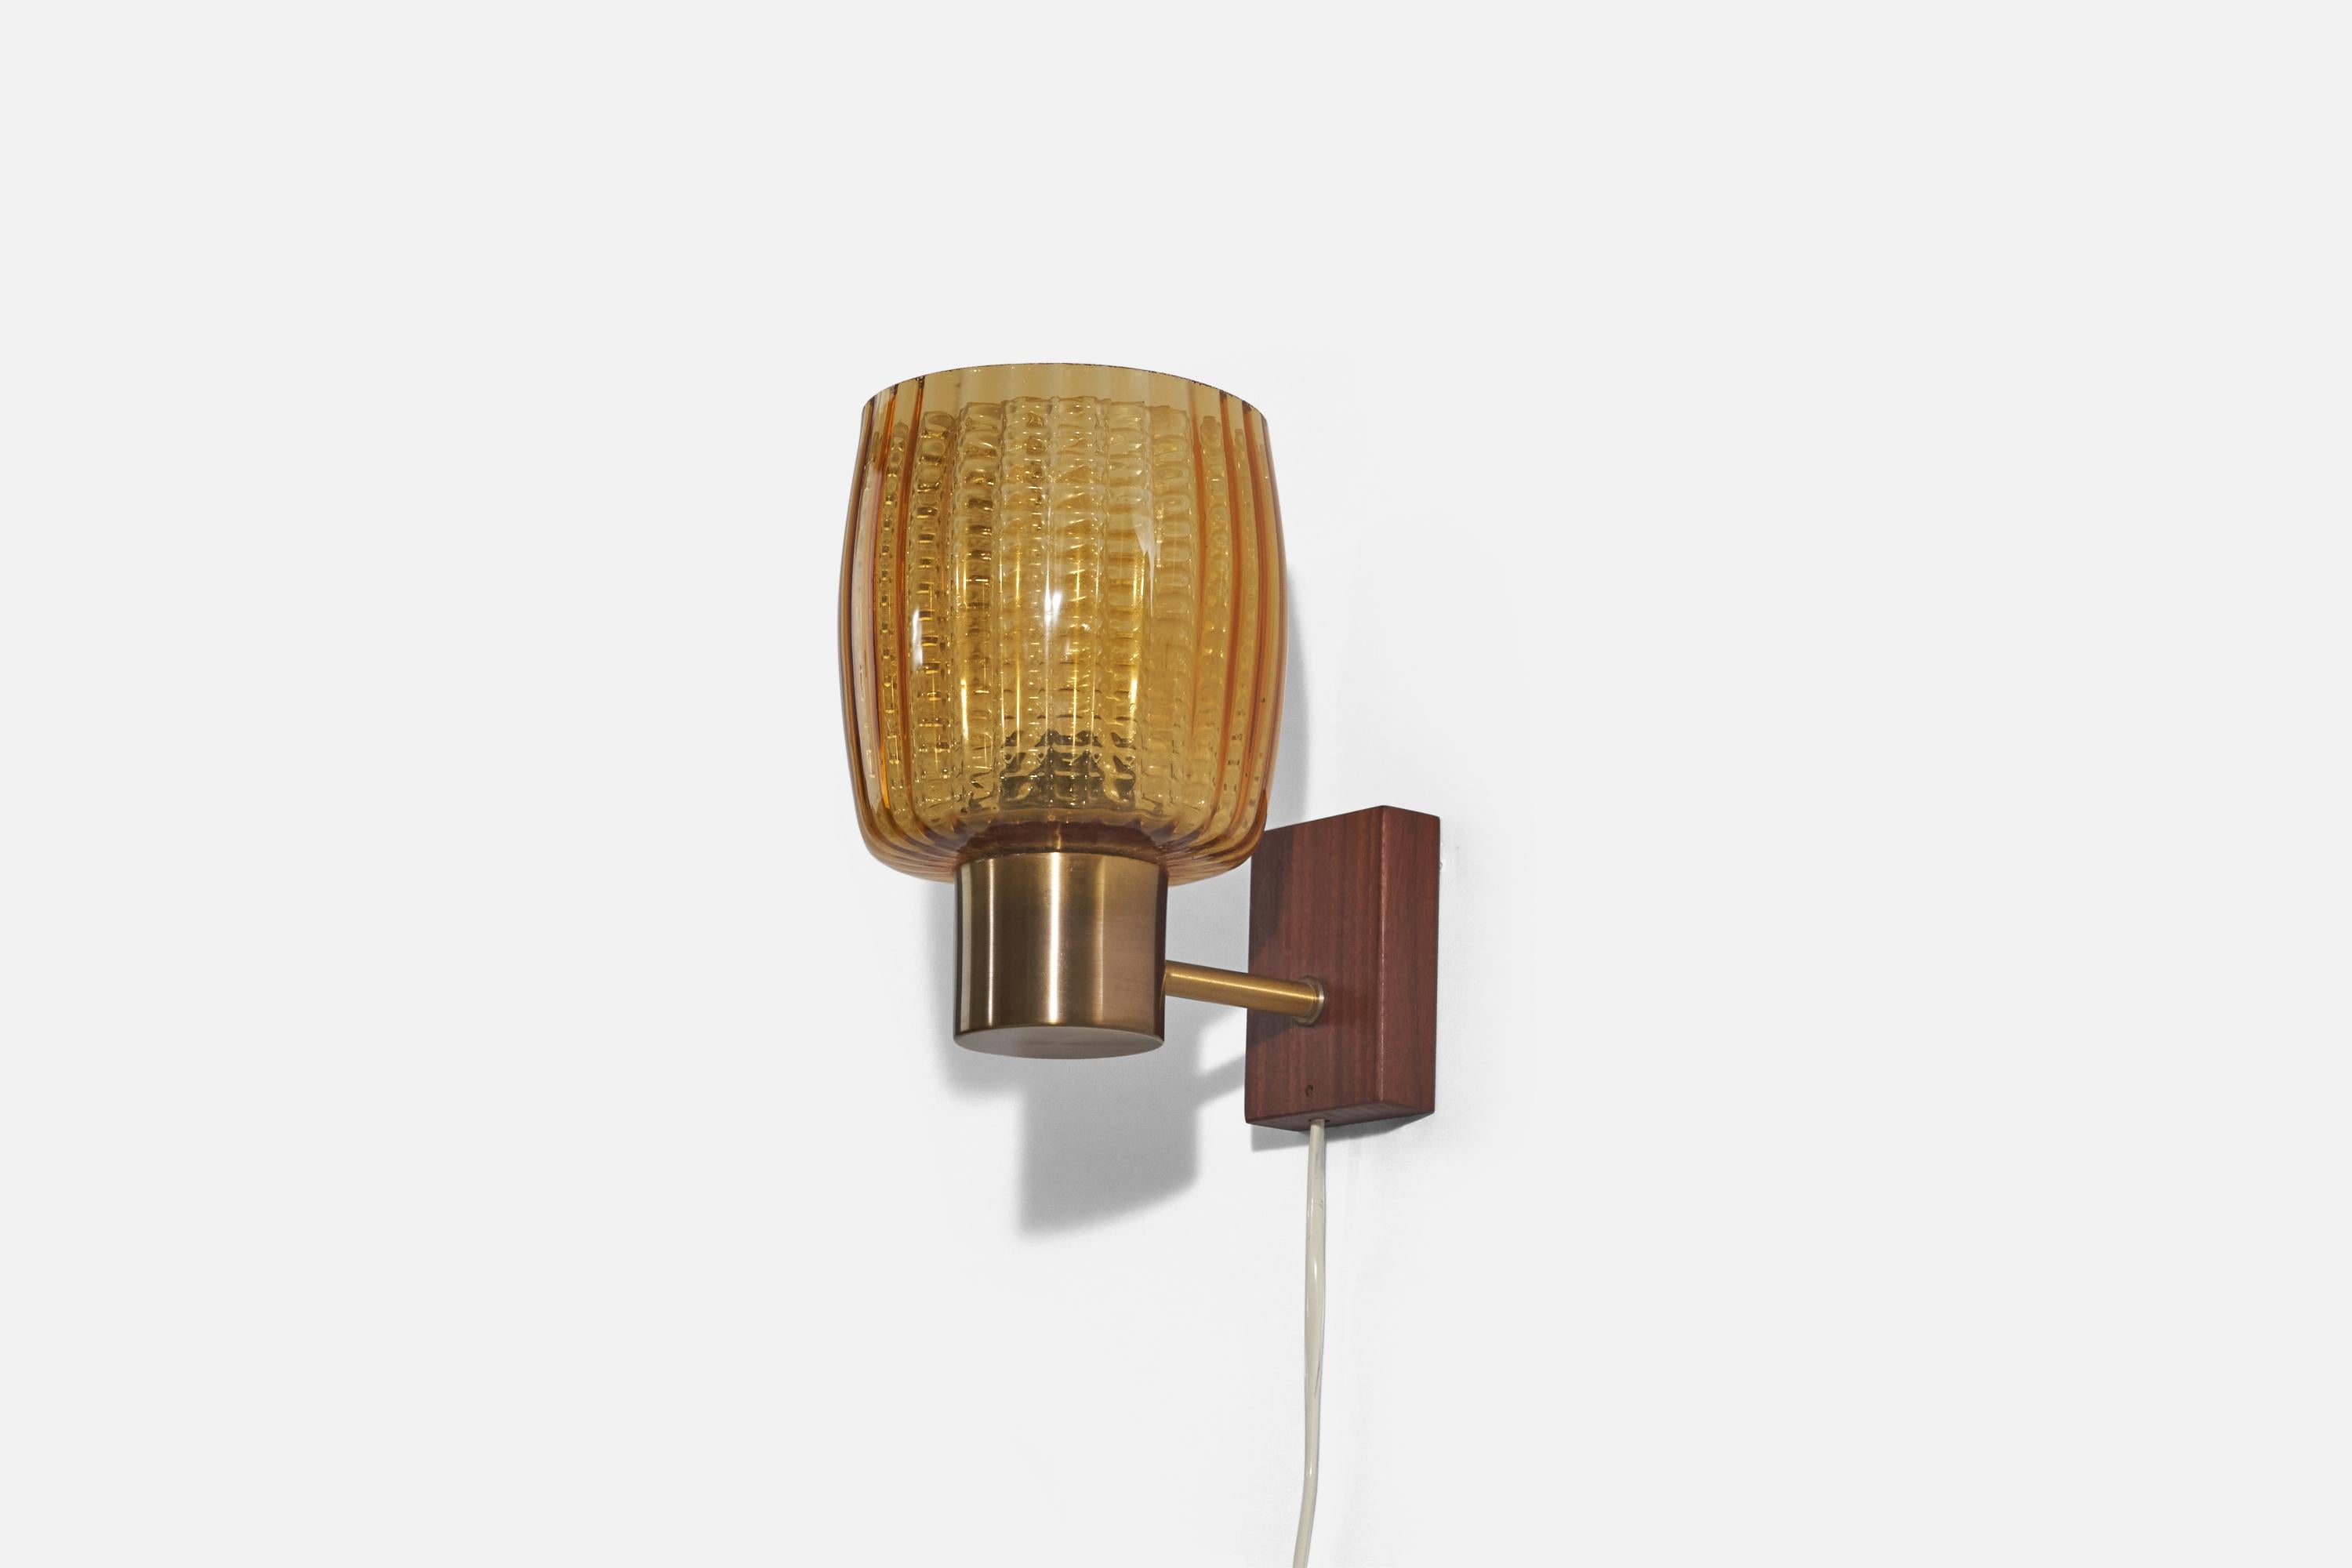 A pair of brass, glass and teak sconces/ wall lights designed and produced in Sweden, c. 1950s. 

Dimensions of back plate (inches) : 3.22 x 2.22 x 0.85 (Height x Width x Depth).

Socket takes standard E-26 medium base bulb.
There is no maximum